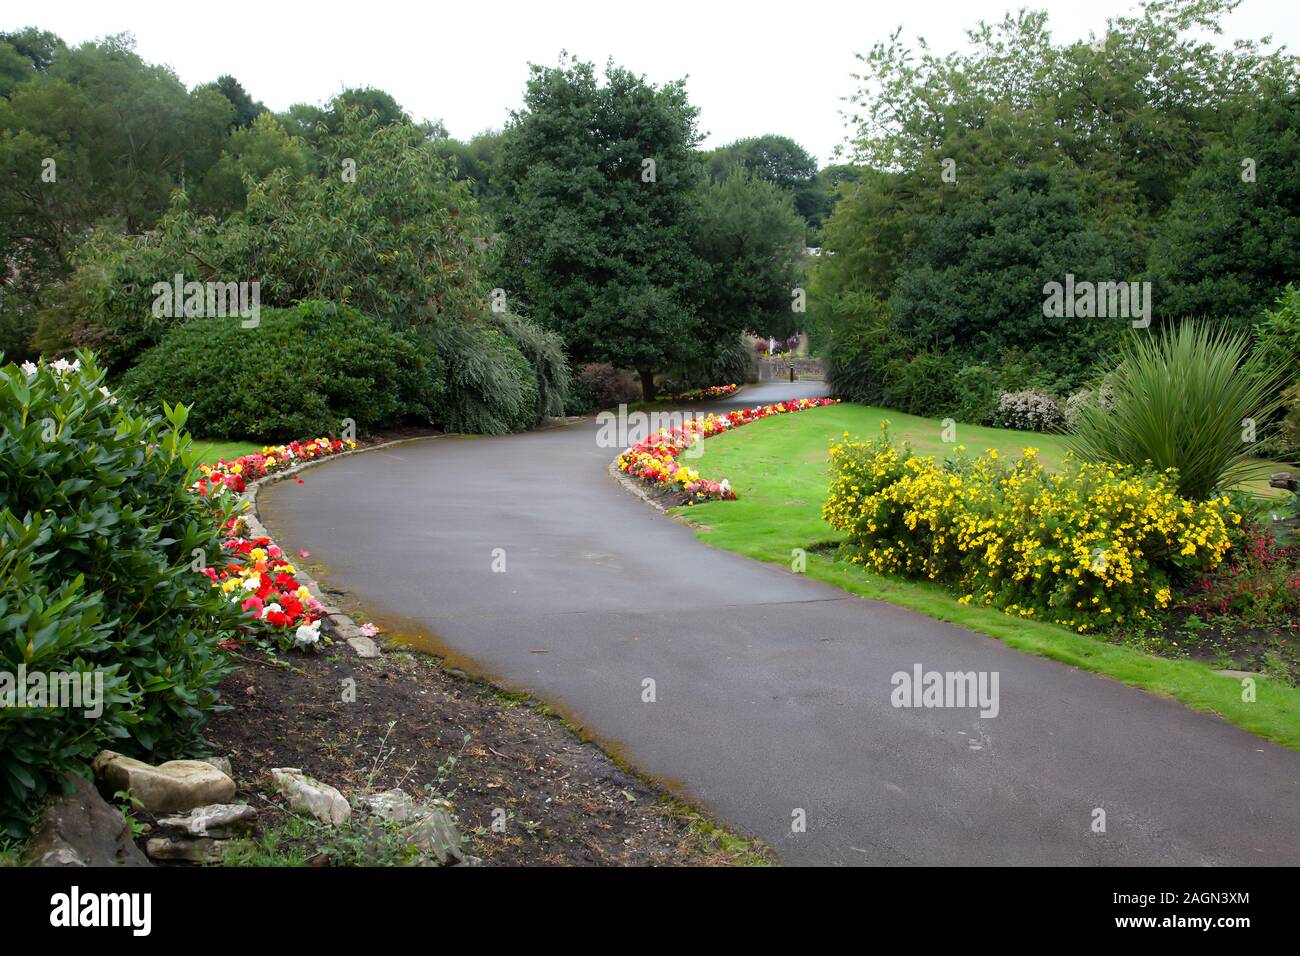 A view of Haworth's Central Park in West Yorkshire during August with beautiful displayed and colourful flower beds Stock Photo